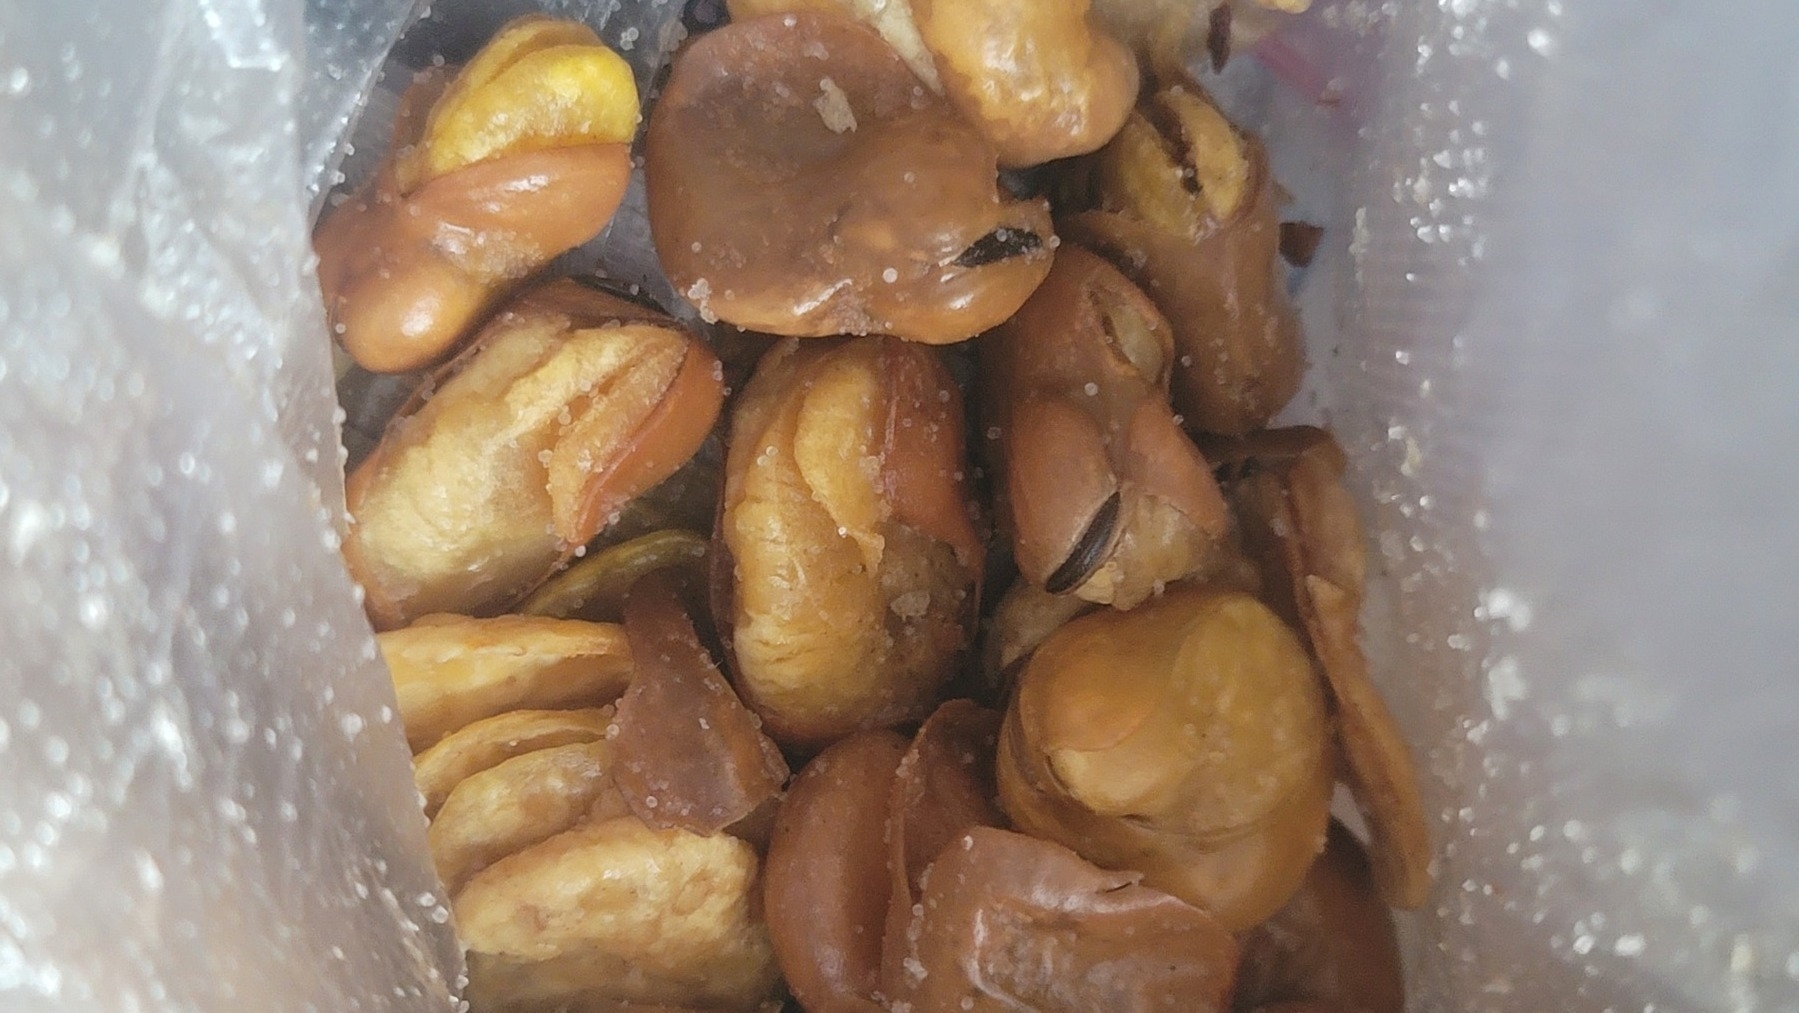 fried, yellow beans in a plastic bag with a thin brown shell